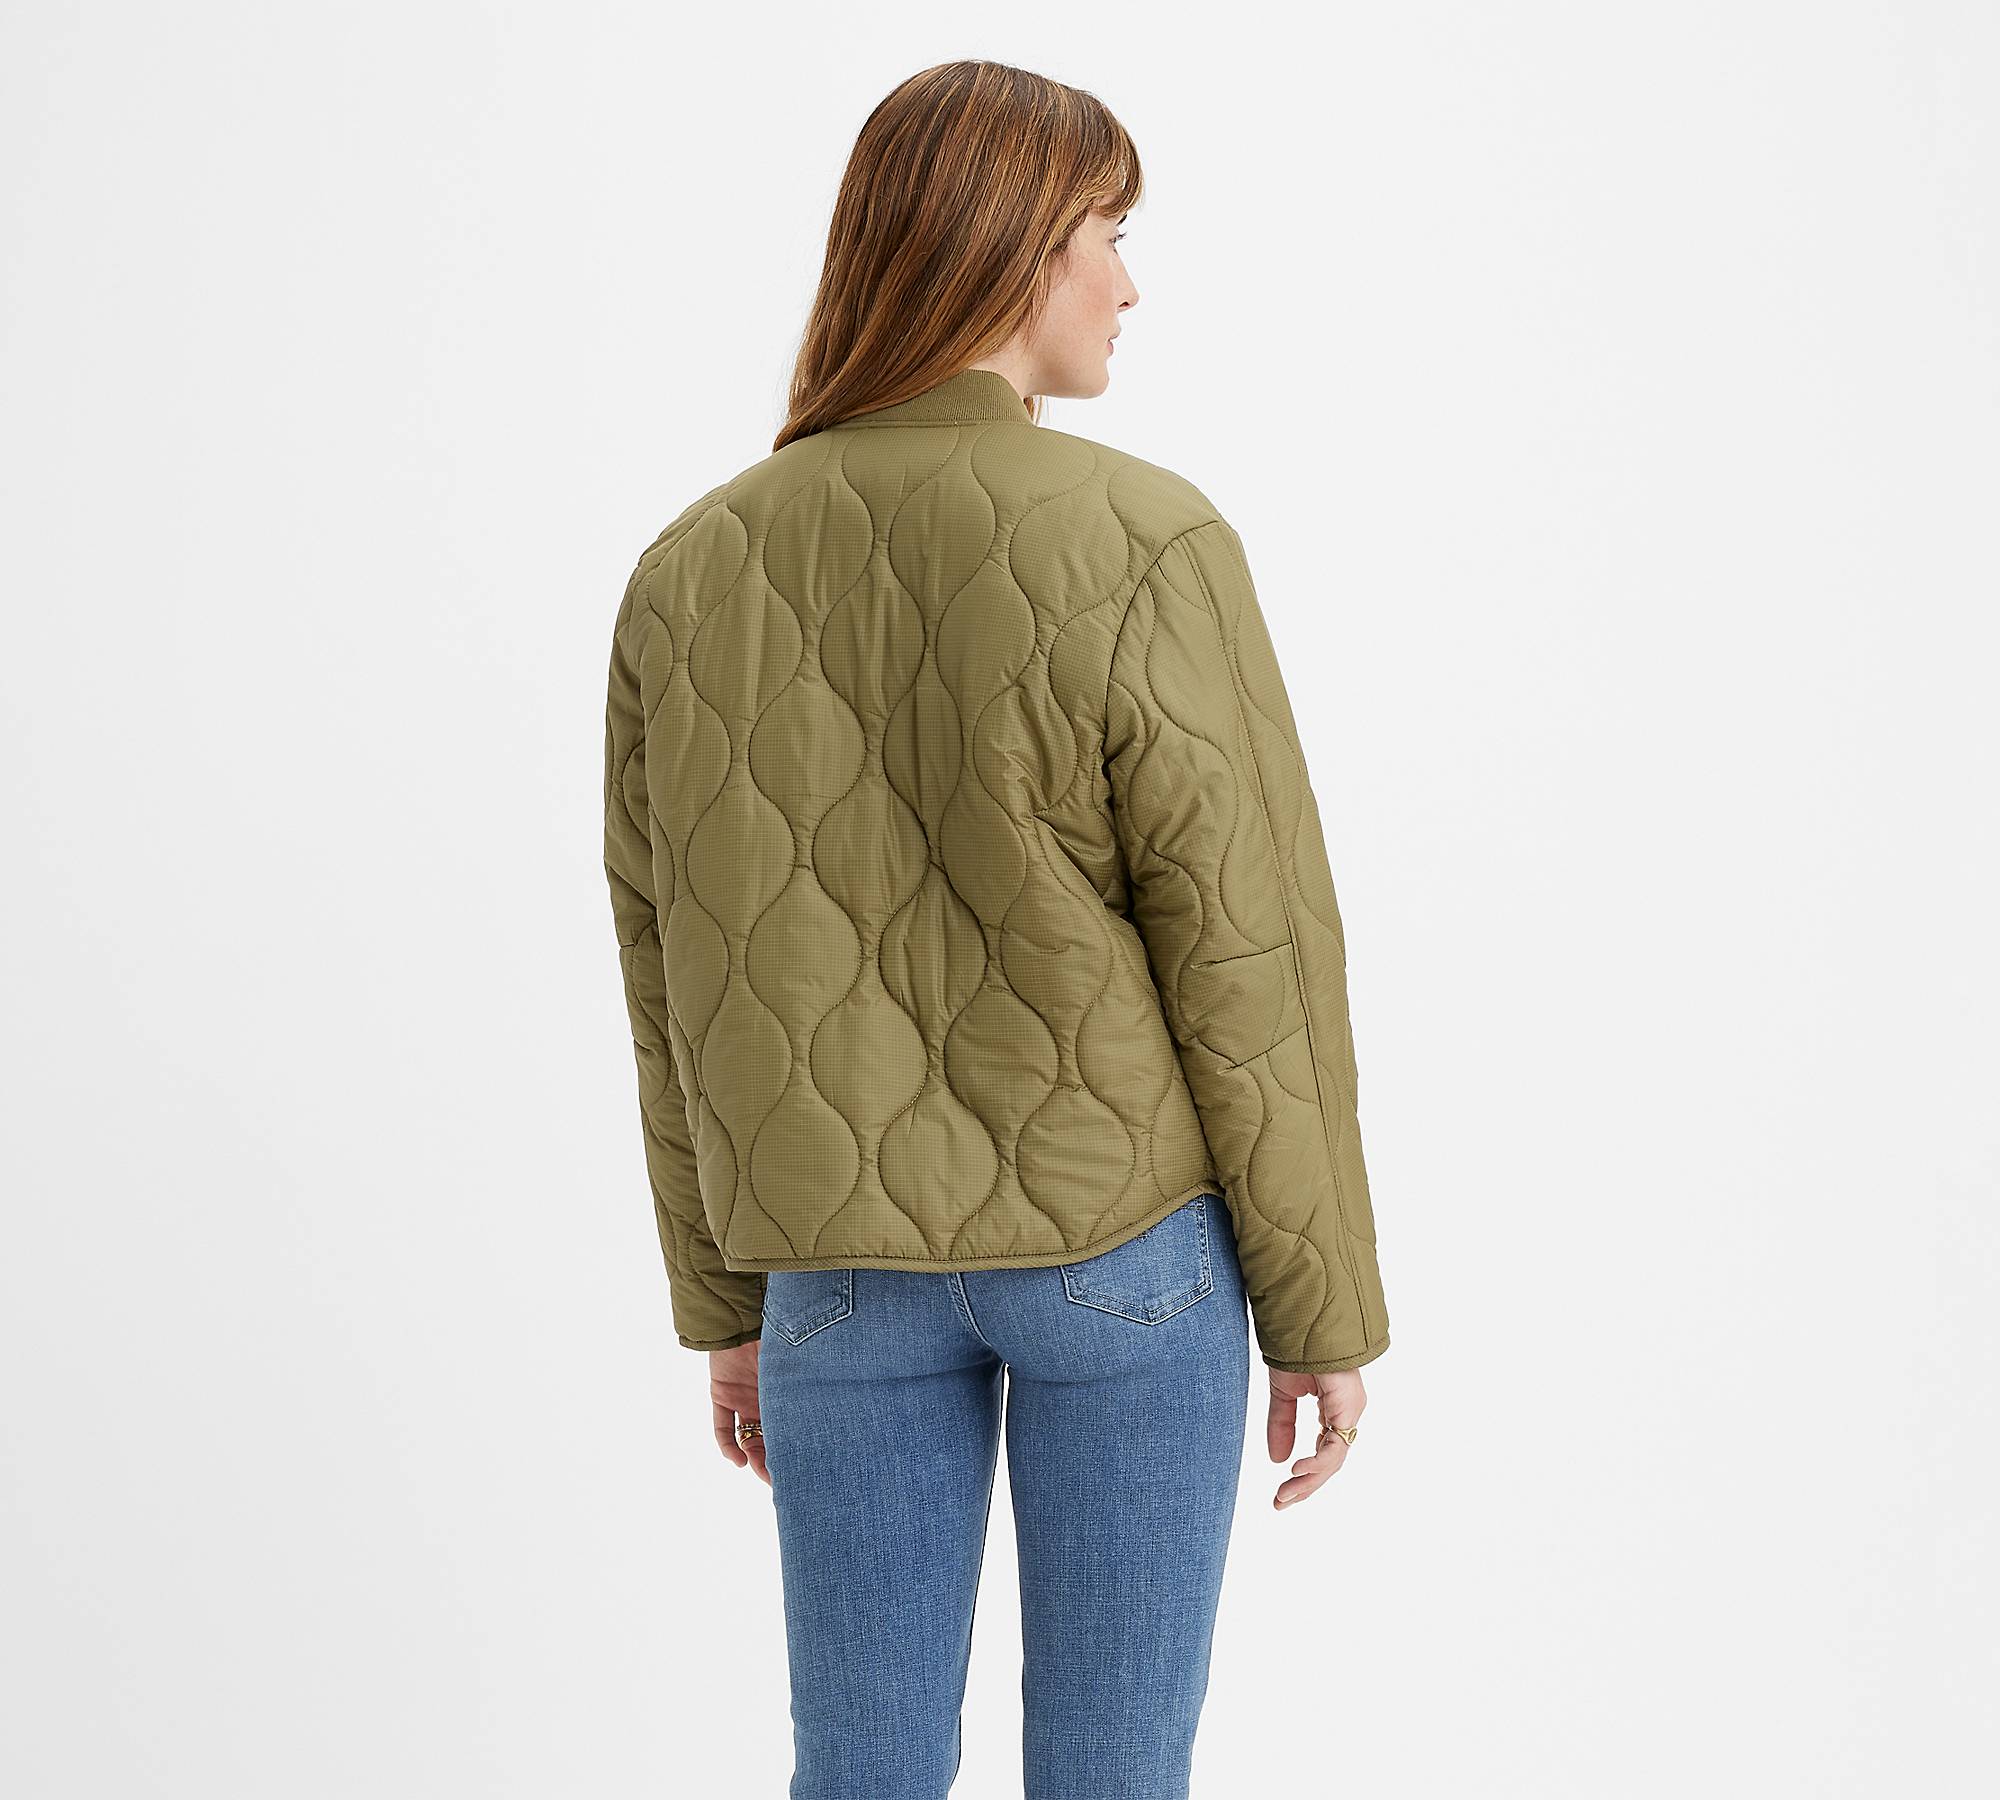 Levi's Onion Quilted Liner Jacket - Women's - Olive Tree XL